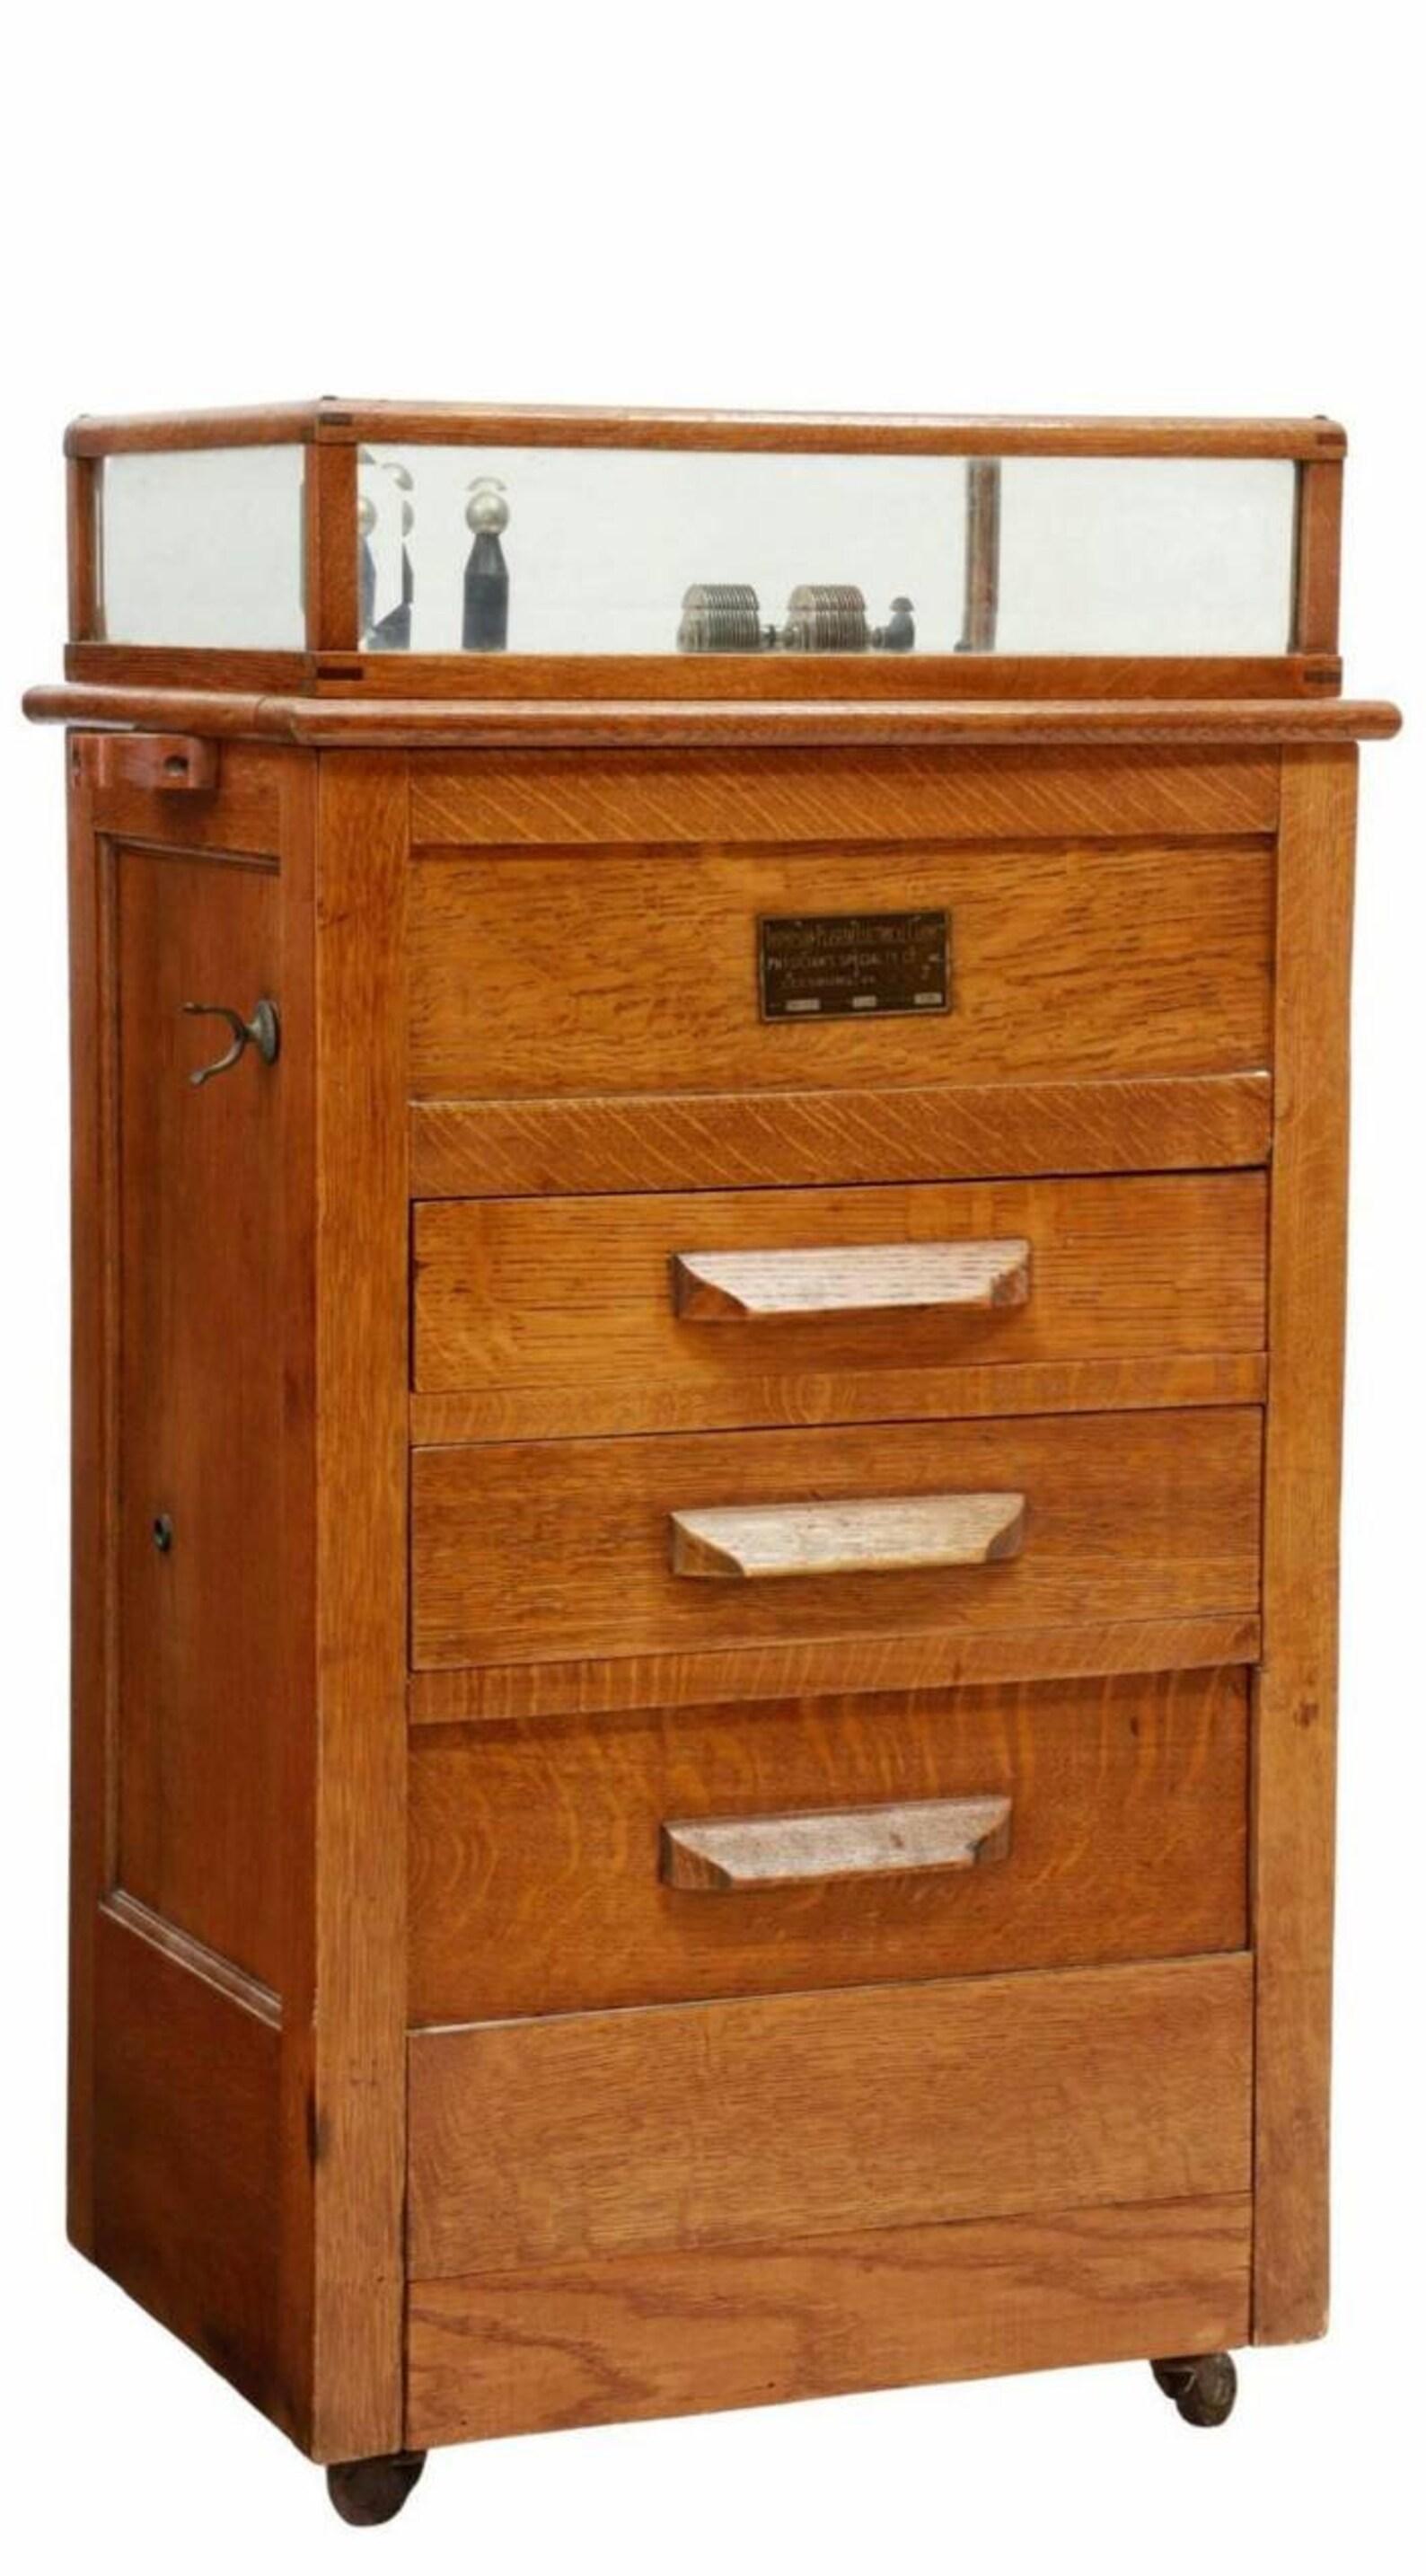 A rare and most unusual Thompson-Plaster electrical cabinet, by Physician's Specialty Company, Leesburg, Virginia, United States. 

The historic turn of the late 19th / early 20th century quack medicine machine used a violent ray electrotherapy